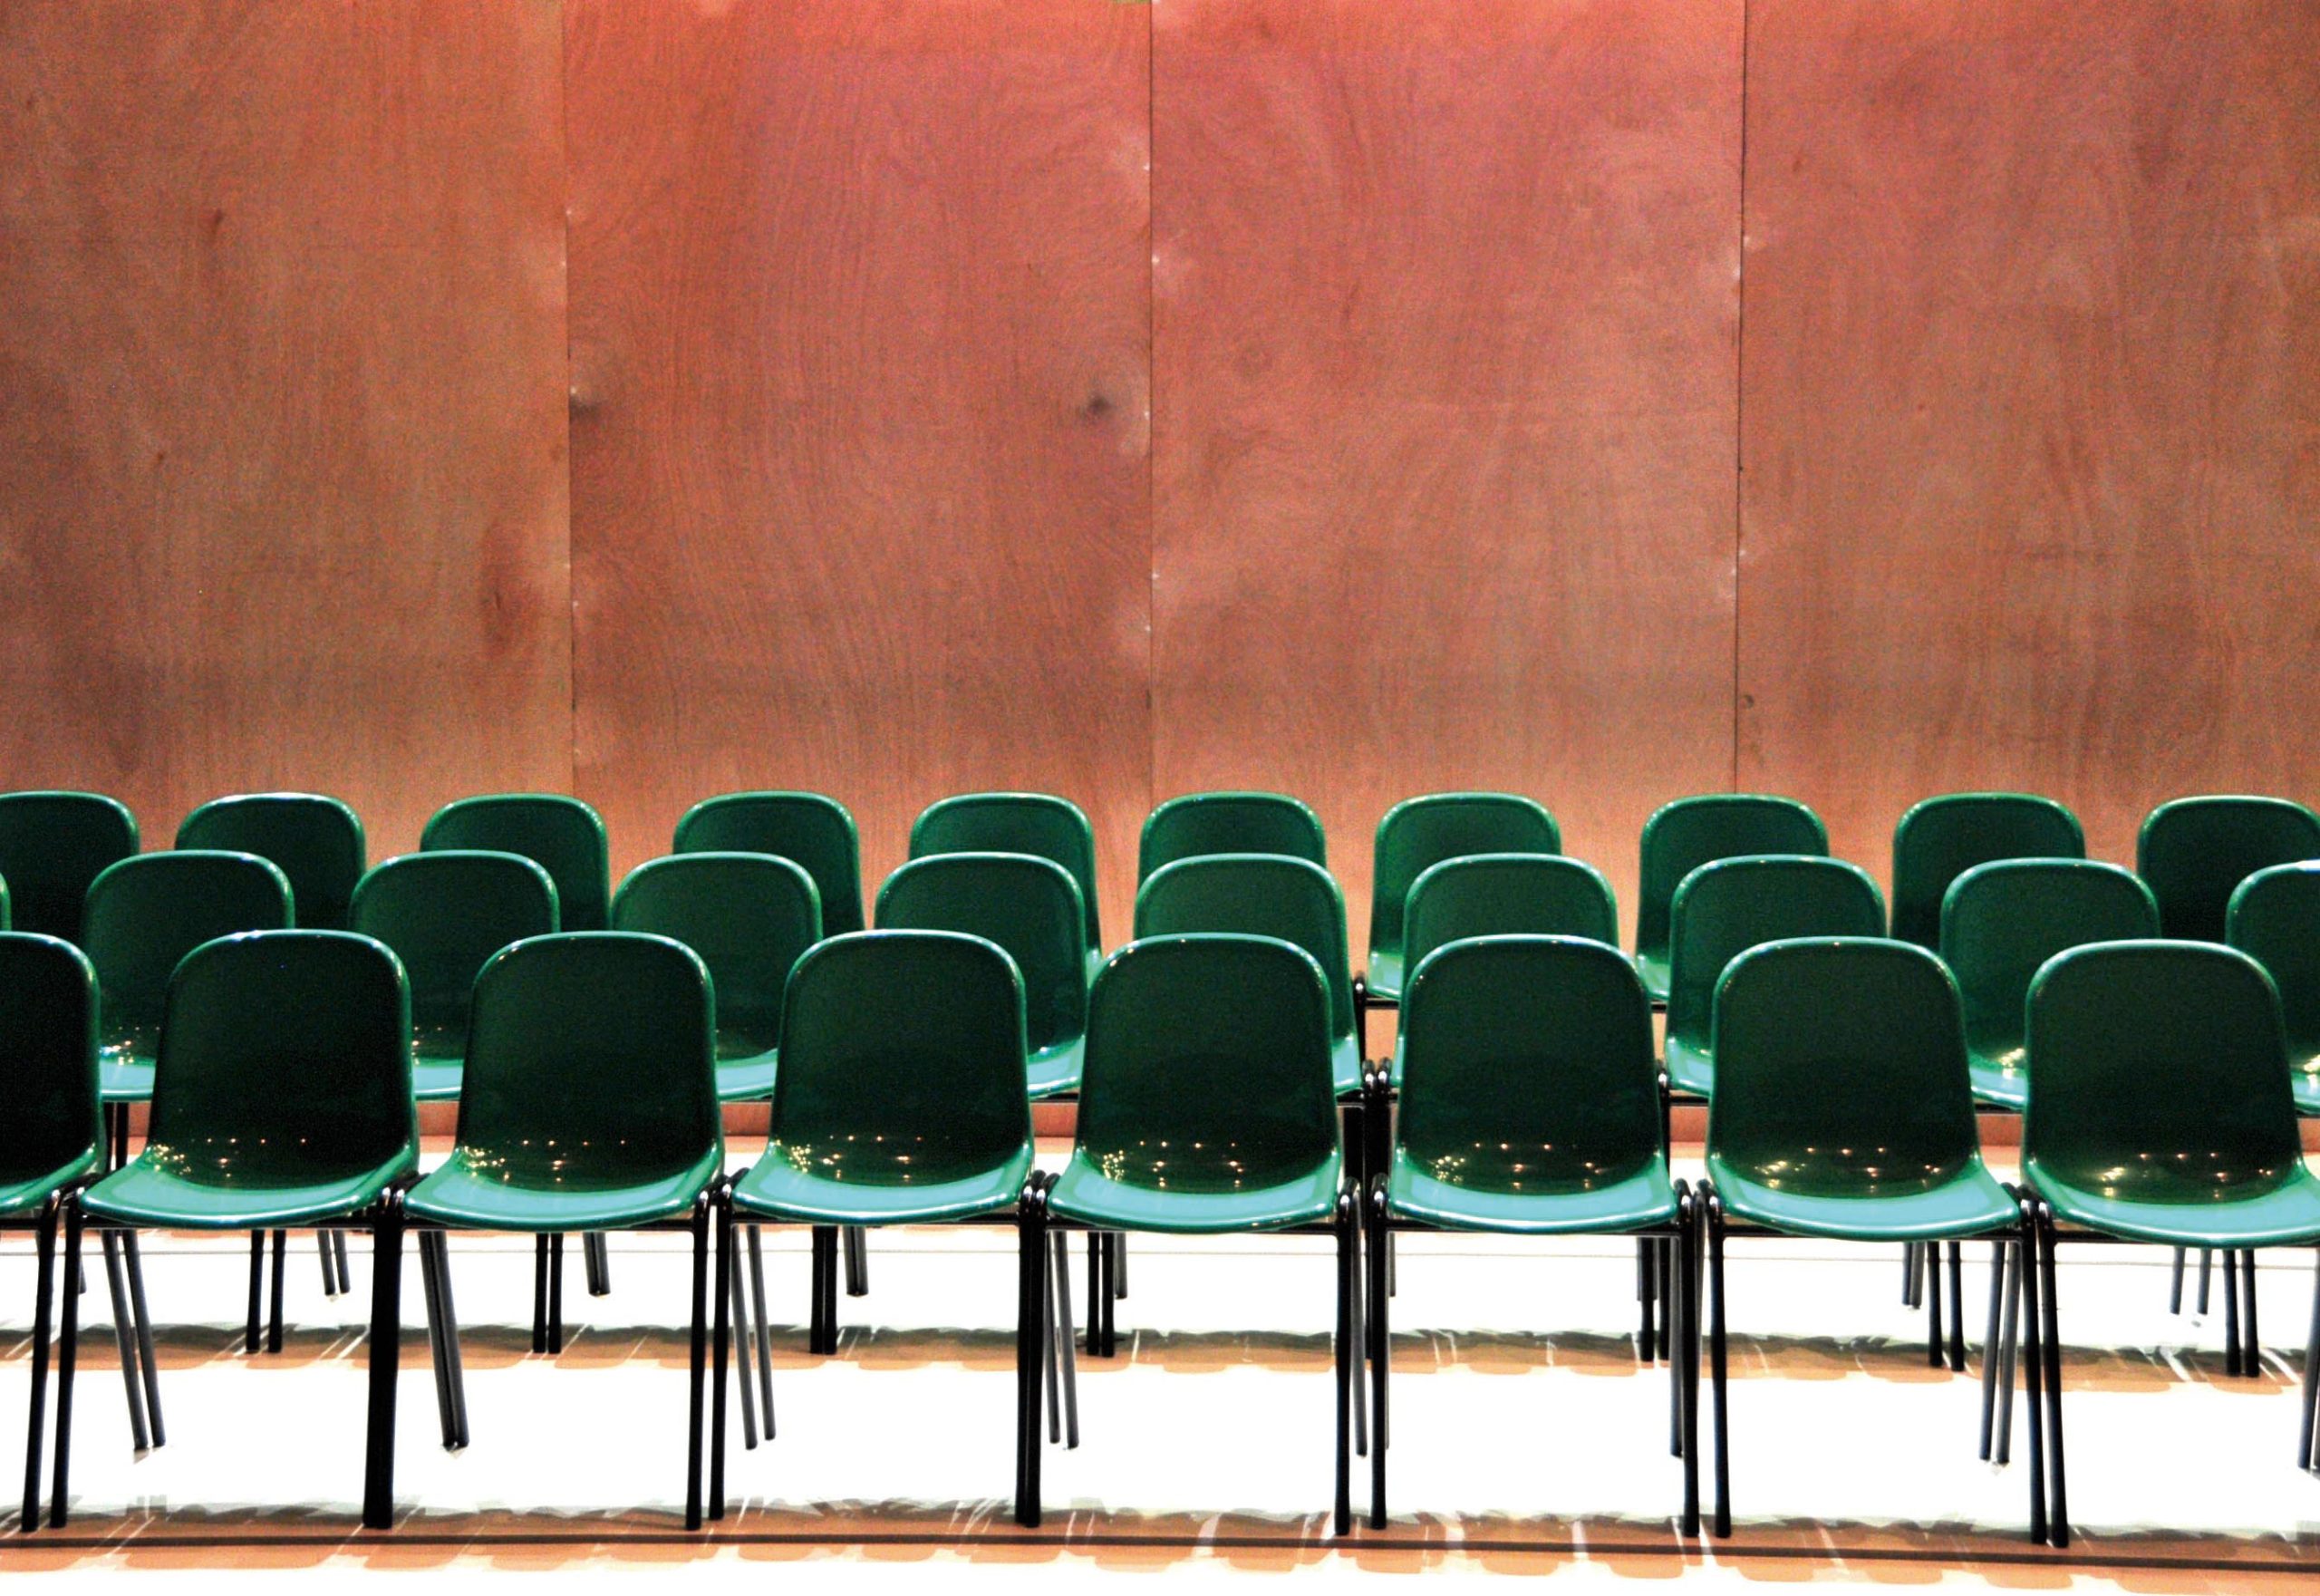 Wooden panelled wall at the back with 3 rows of green plastic chairs in the foreground